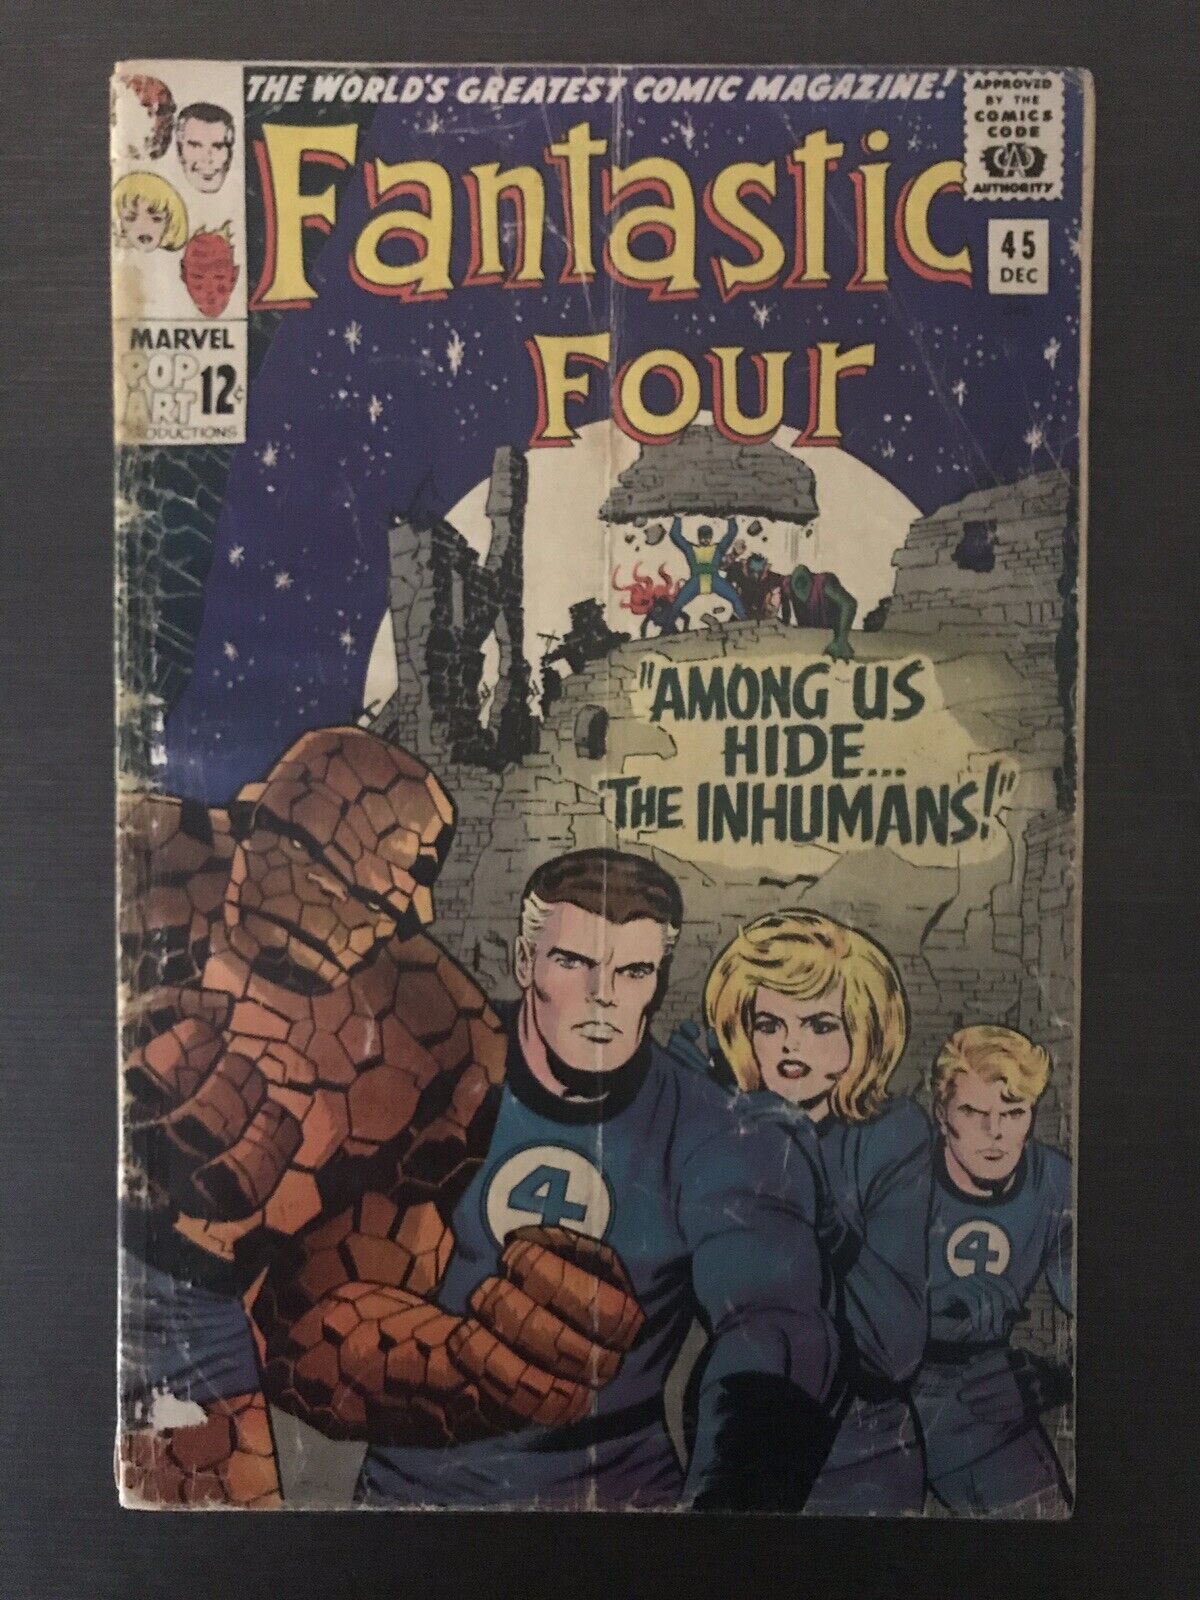 Fantastic Four #45 First Printing Comic Book. 1st appearance of the Inhumans